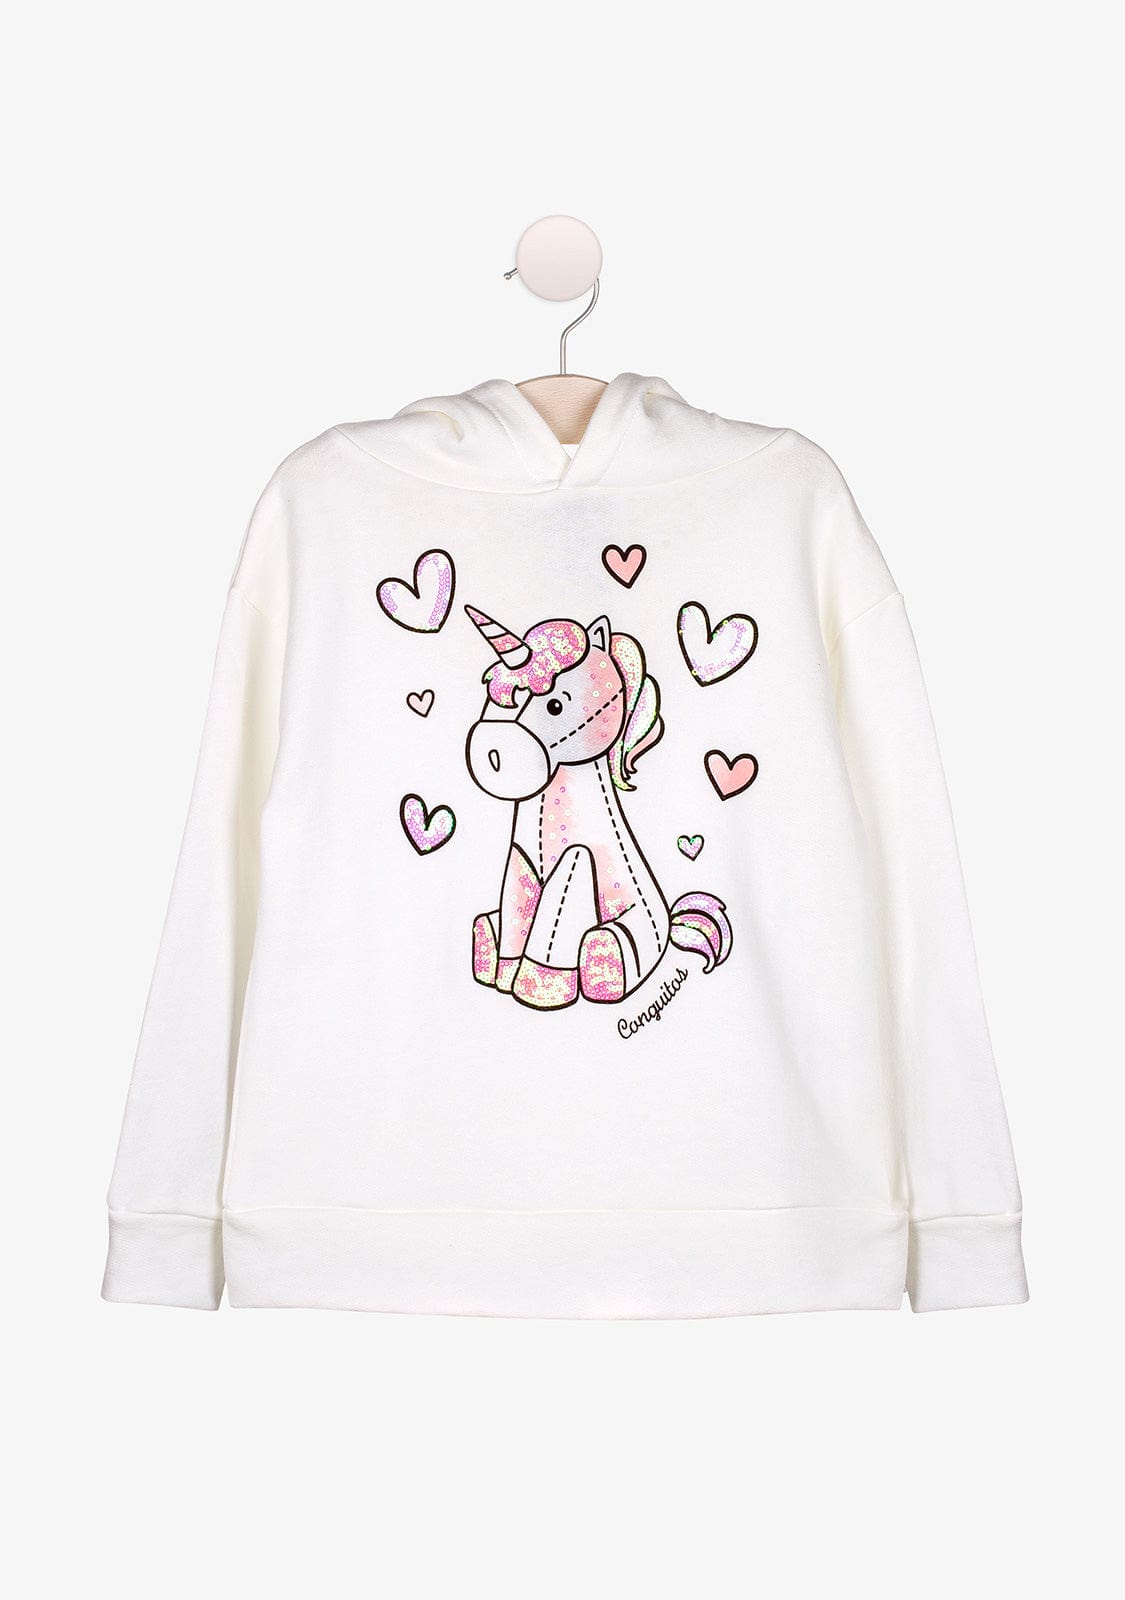 CONGUITOS TEXTIL Clothing Girl's Teddy Unicorn Hoodie